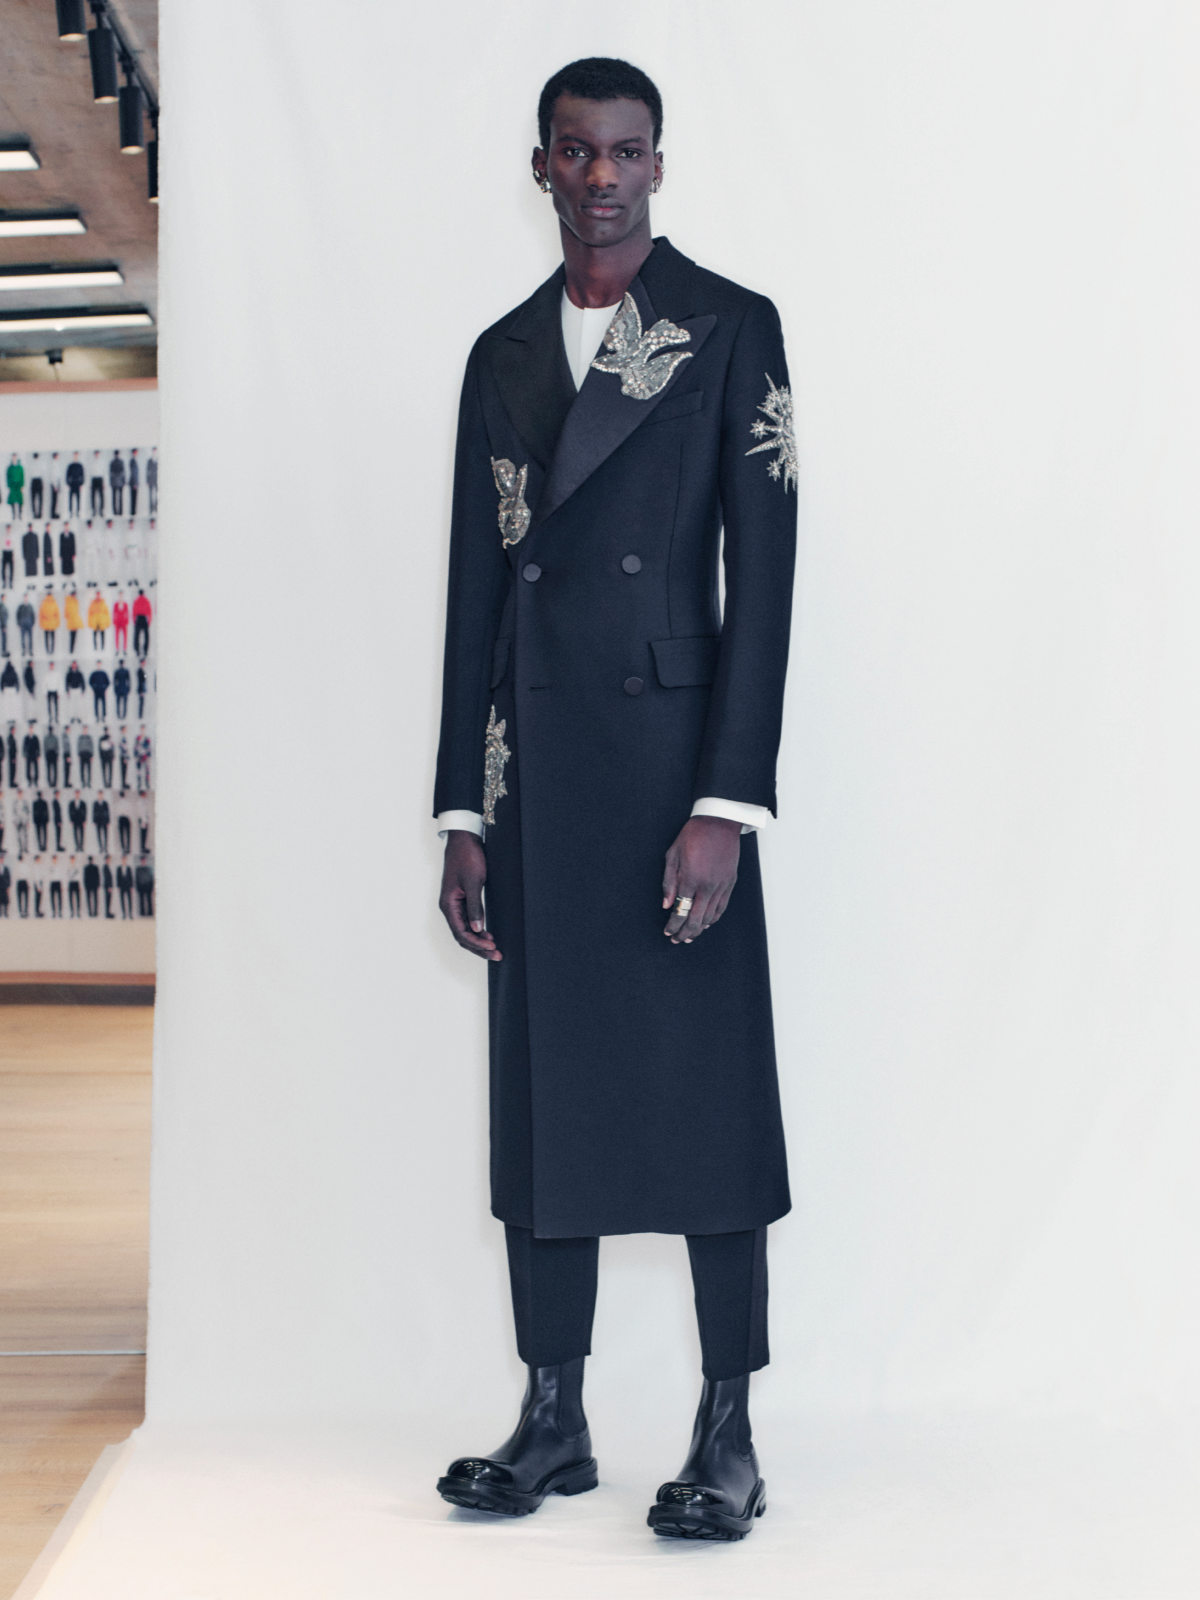 Alexander McQueen Introduces Its New Autumn Winter 2021 Menswear Collection